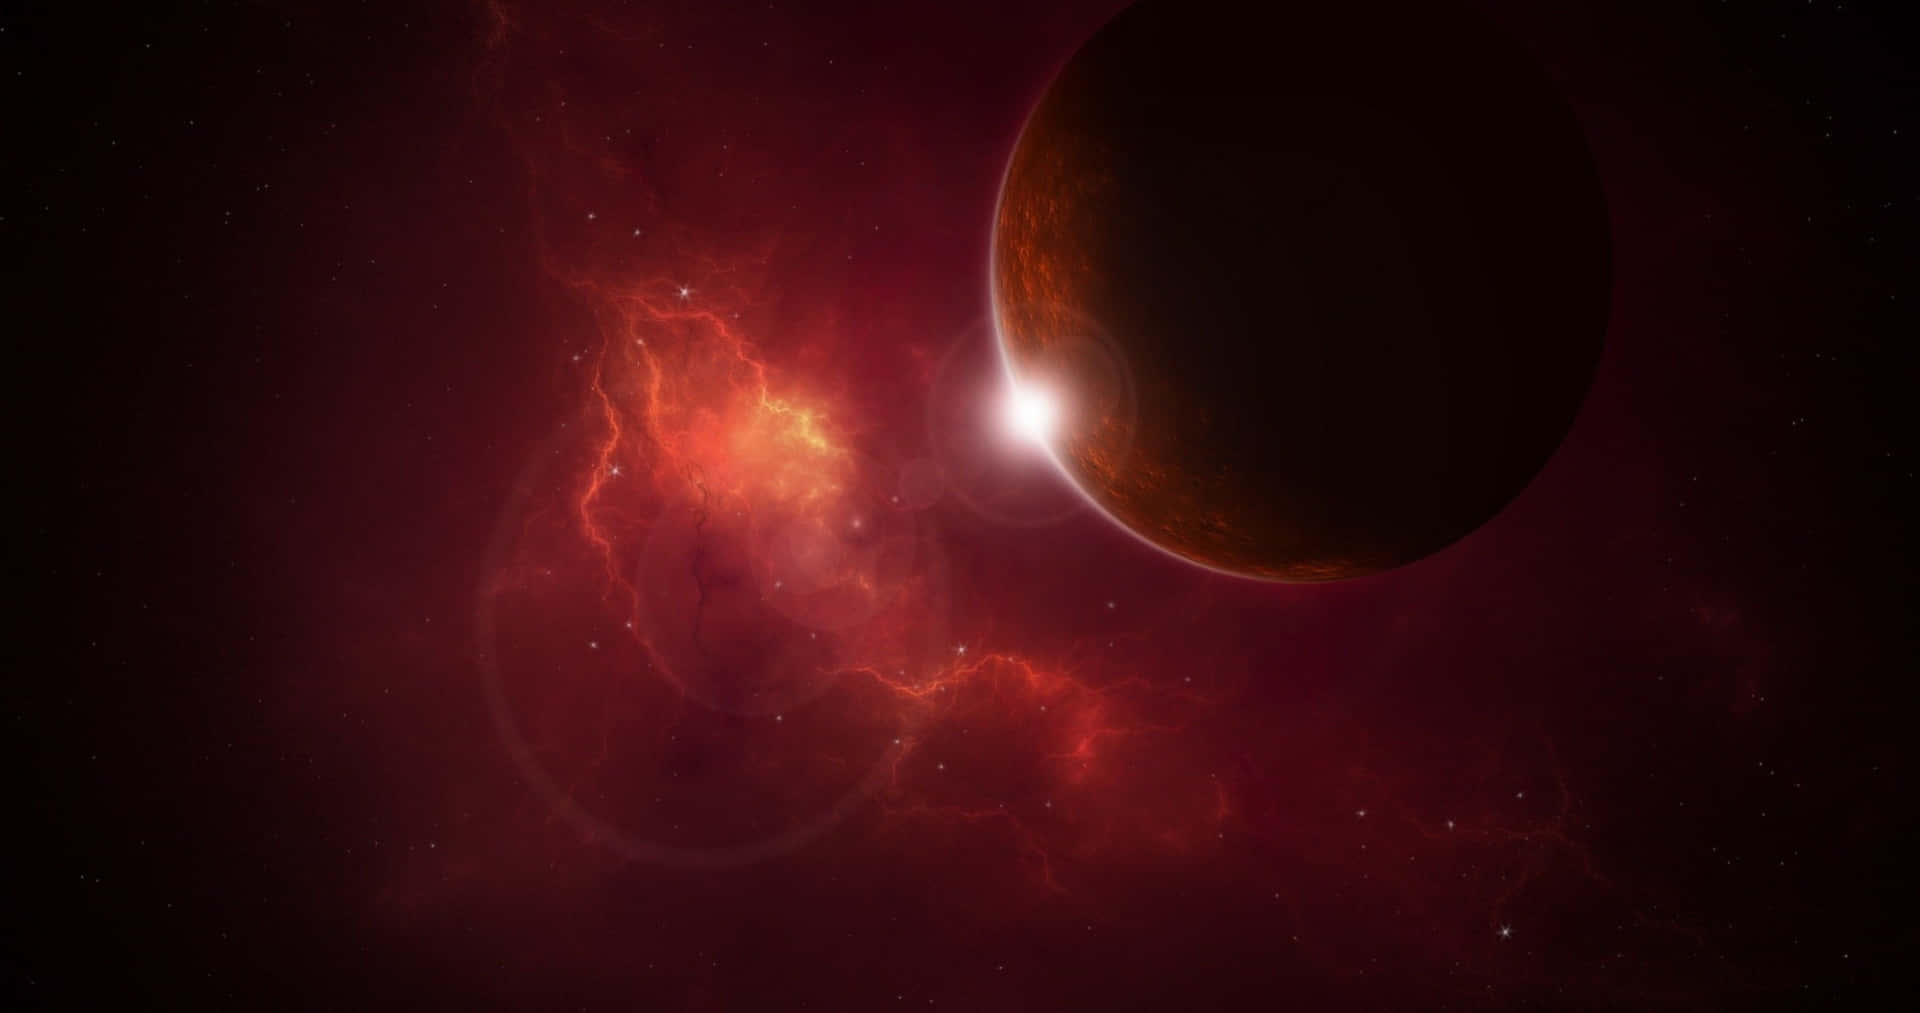 Experience an Other-Wordly Wondrous 4K Red Outer Space Wallpaper